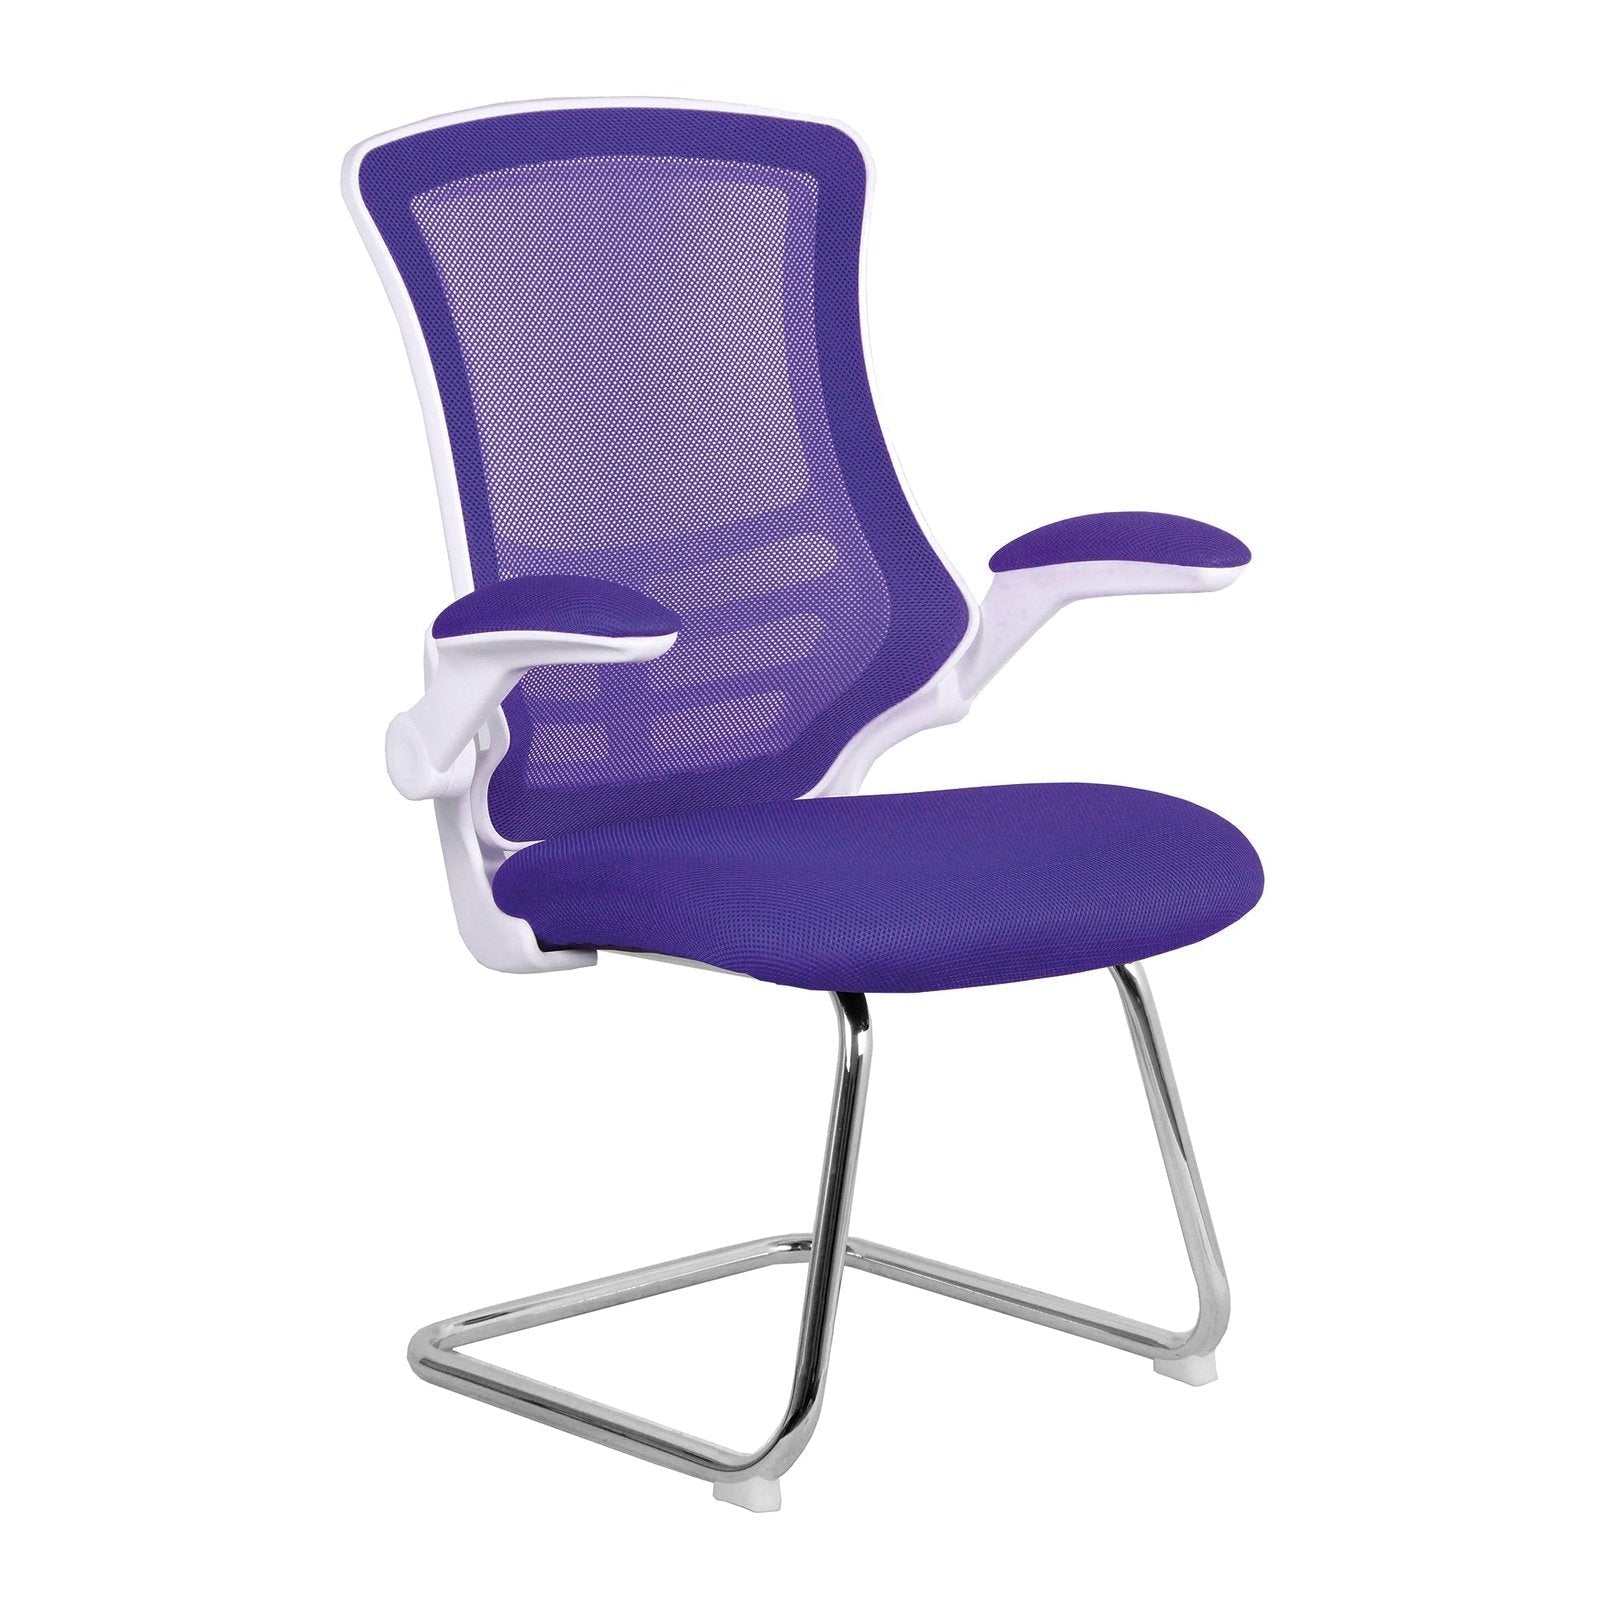 Designer Medium Back Mesh Cantilever Chair with White Shell, Chrome Frame and Folding Arms - Office Products Online